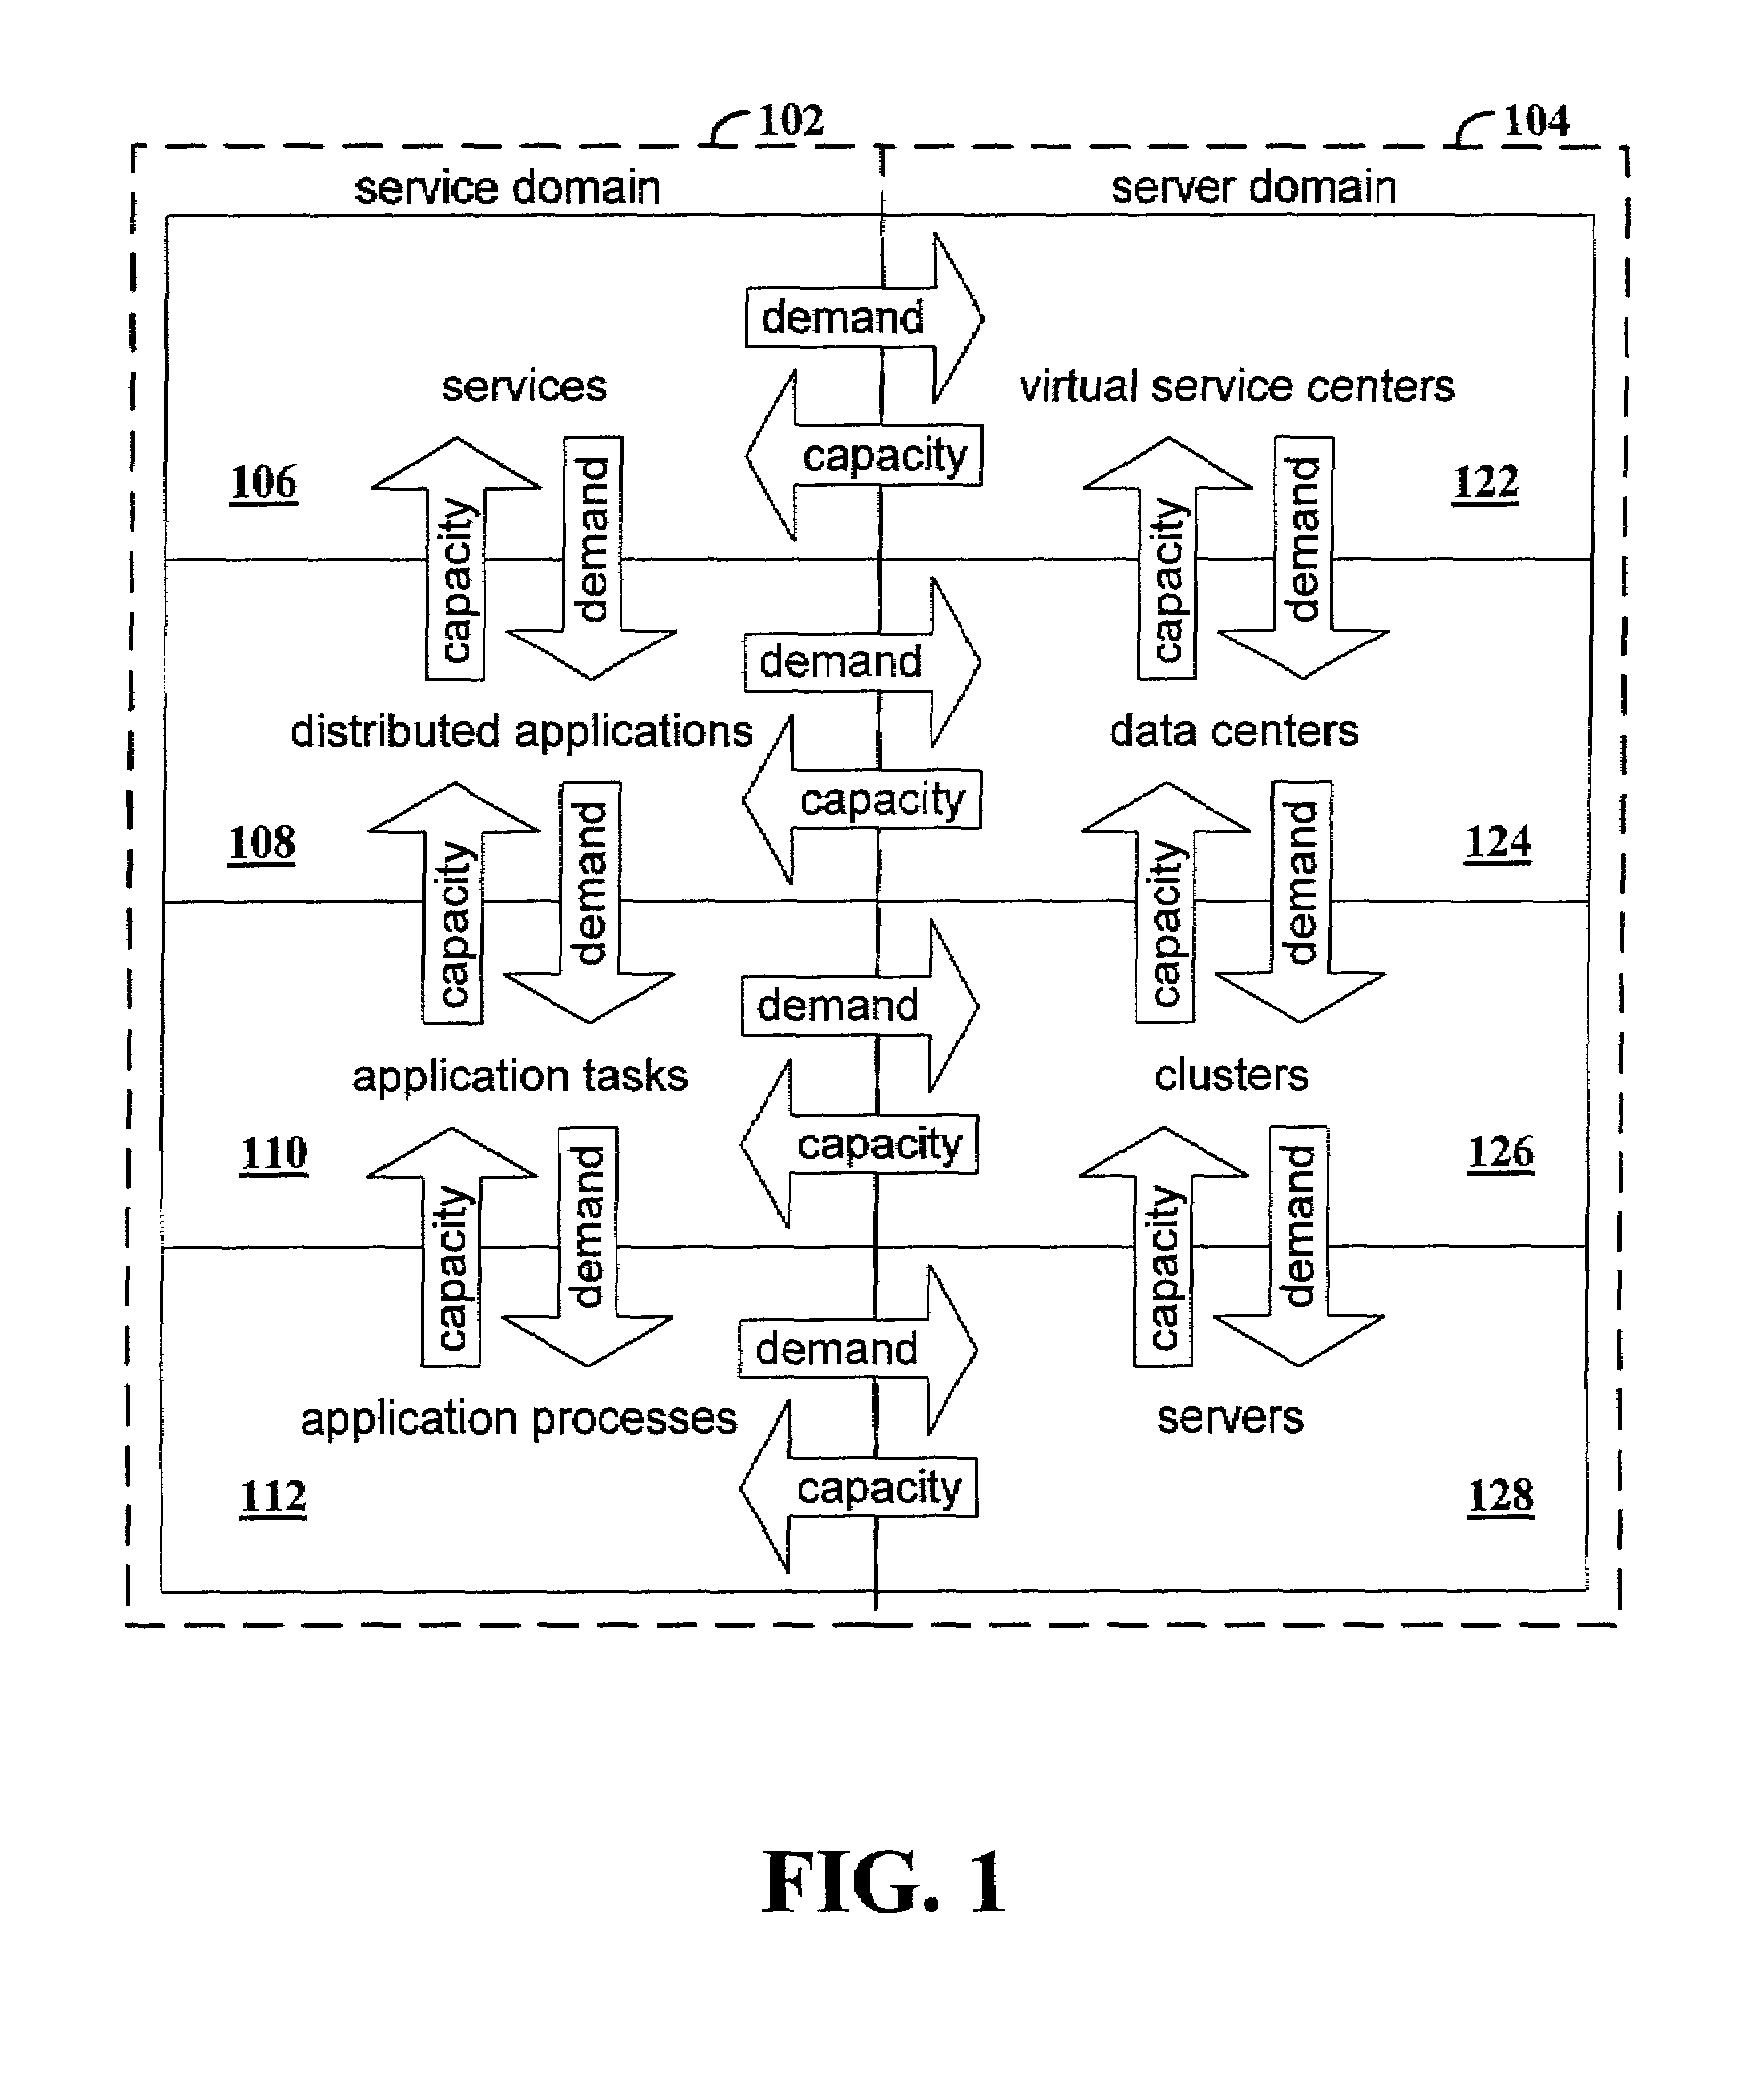 Method and framework for generating an optimized deployment of software applications in a distributed computing environment using layered model descriptions of services and servers